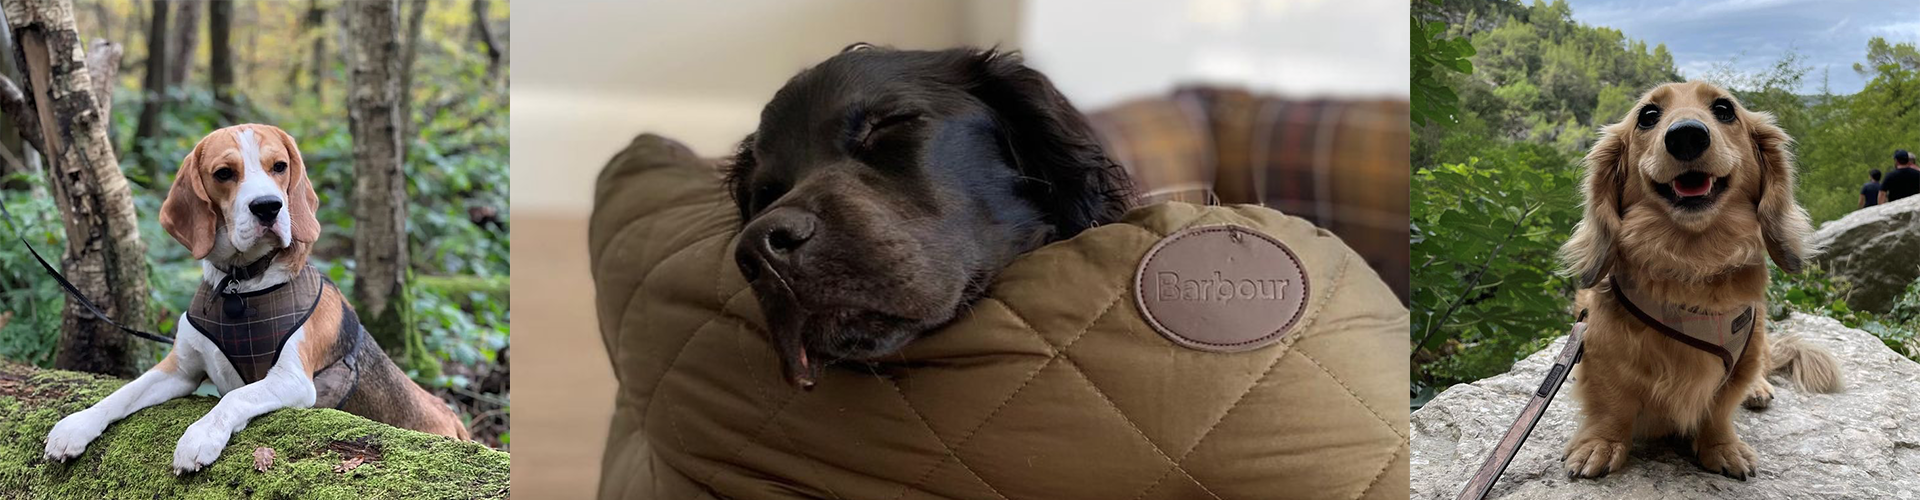 Barbour Dogs Dog of the Month Competition